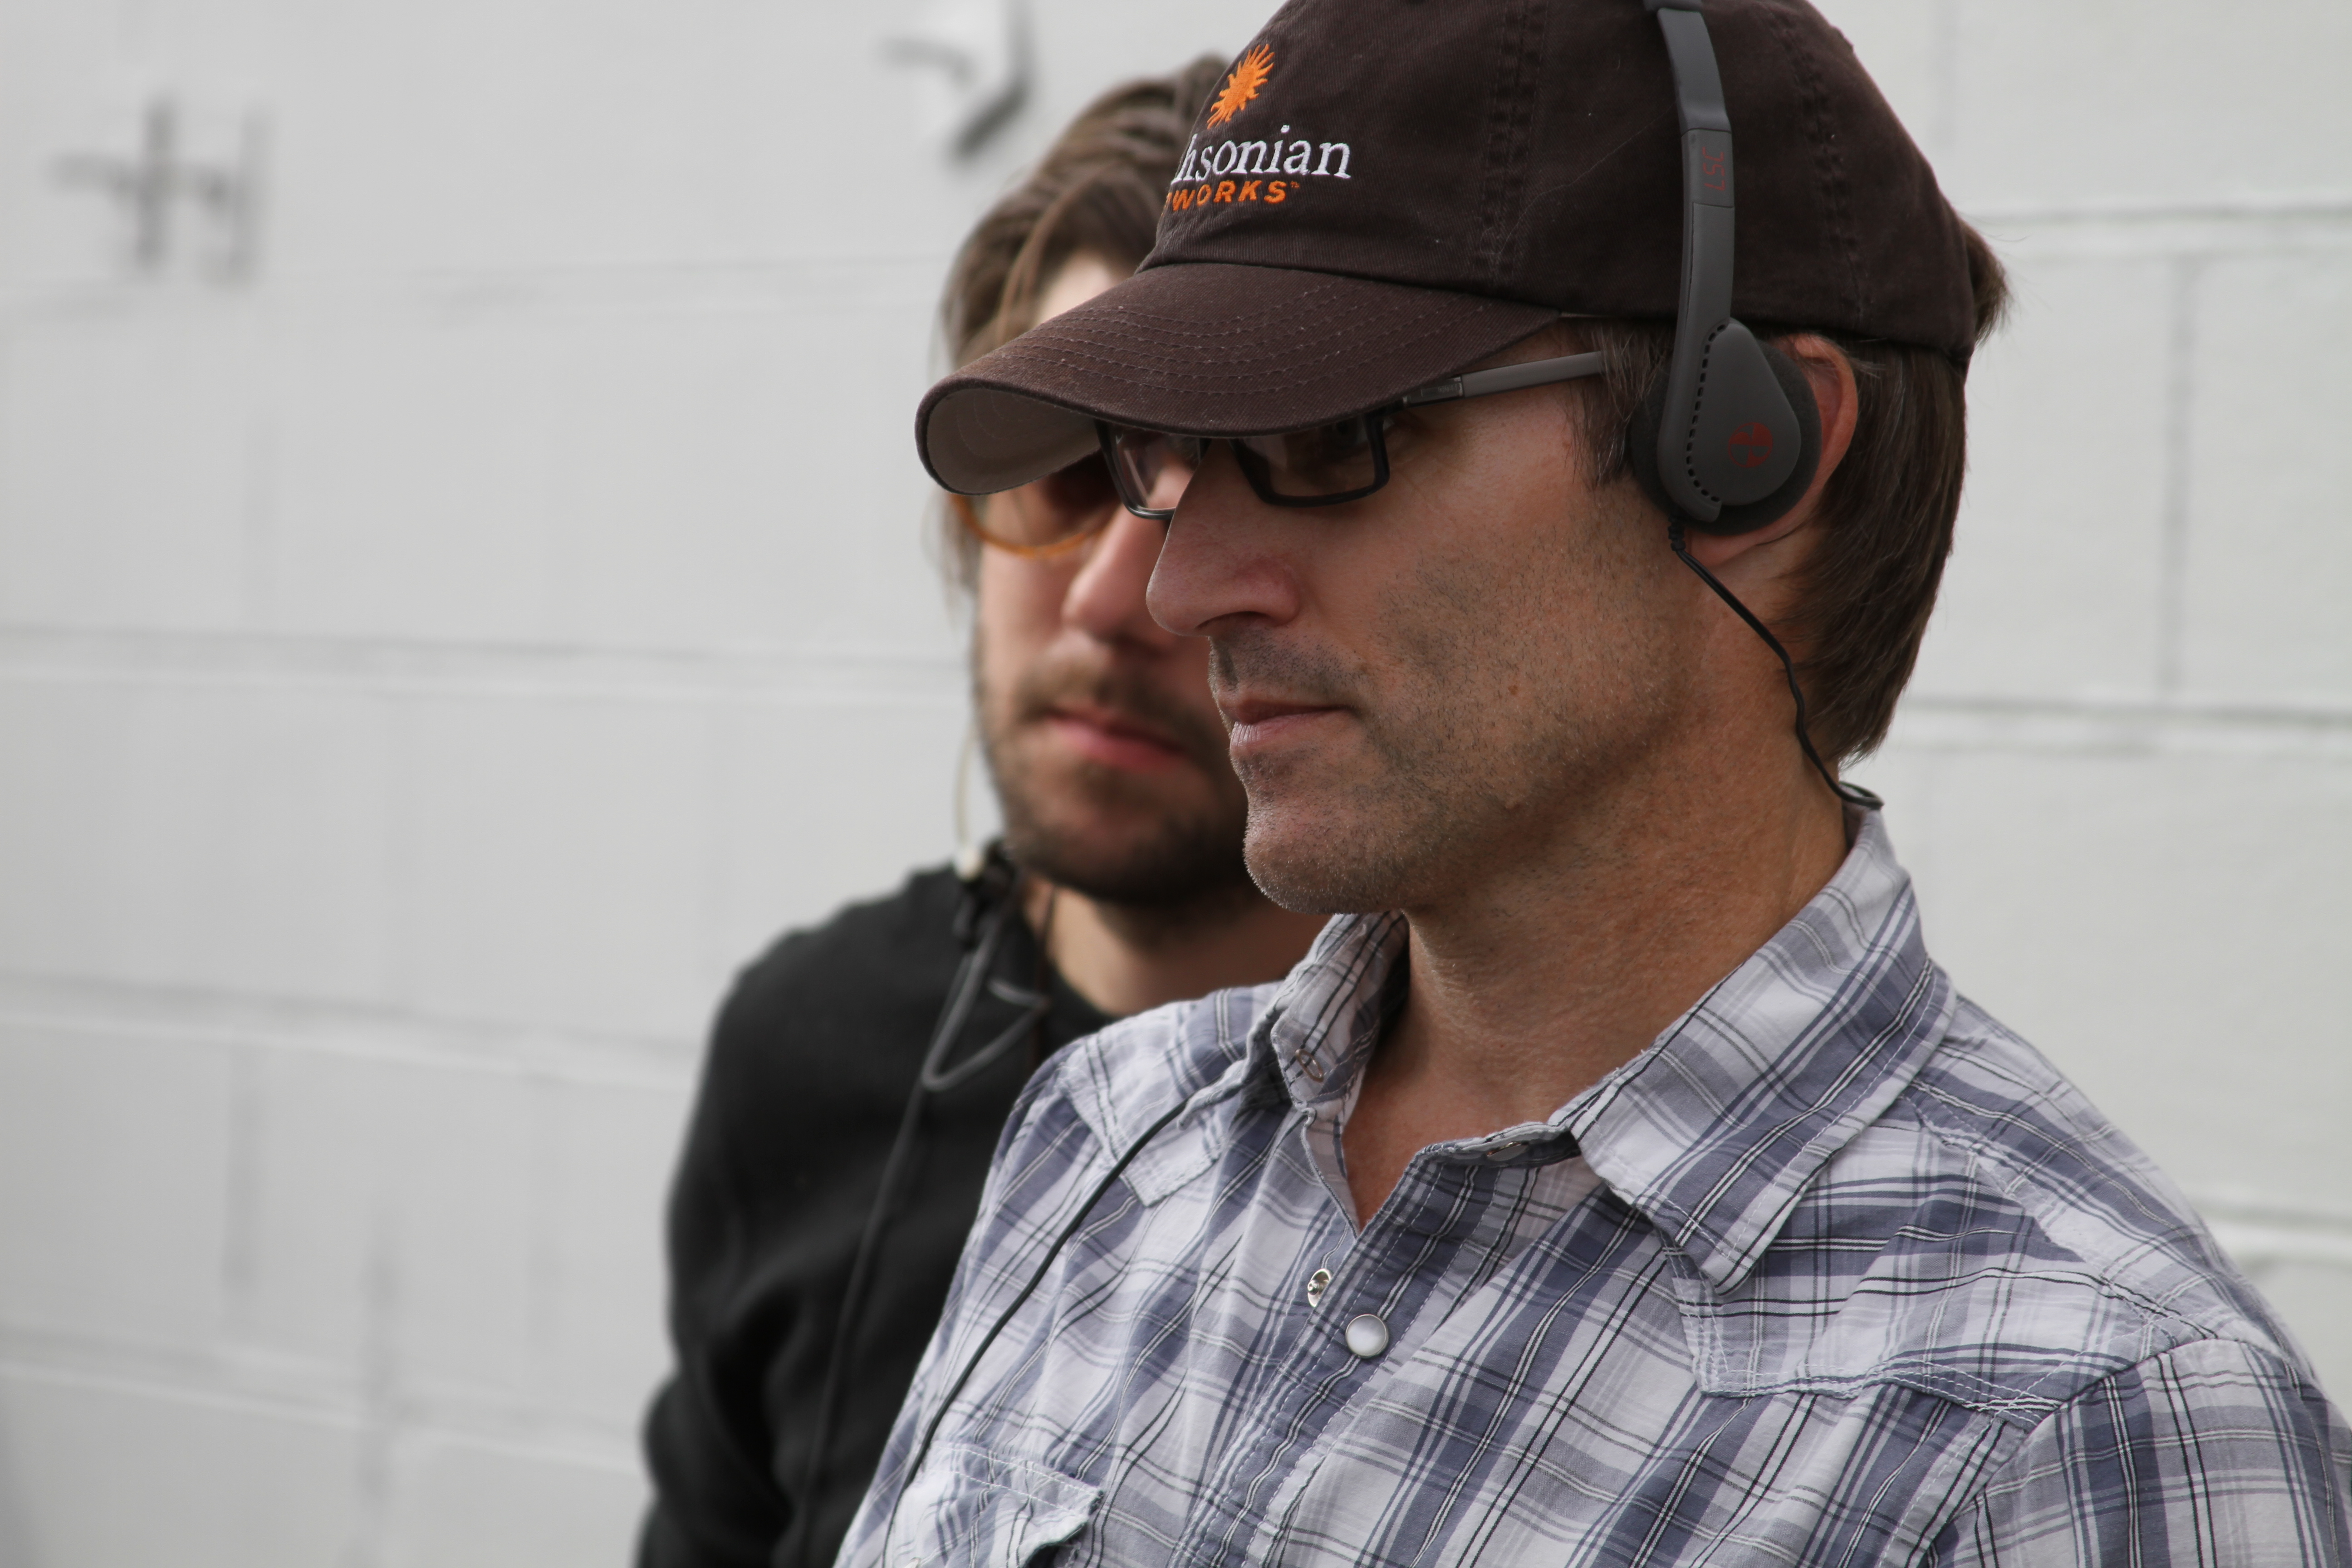 Darren Moorman with Director Brent McCorkle on the set of their film Unconditional